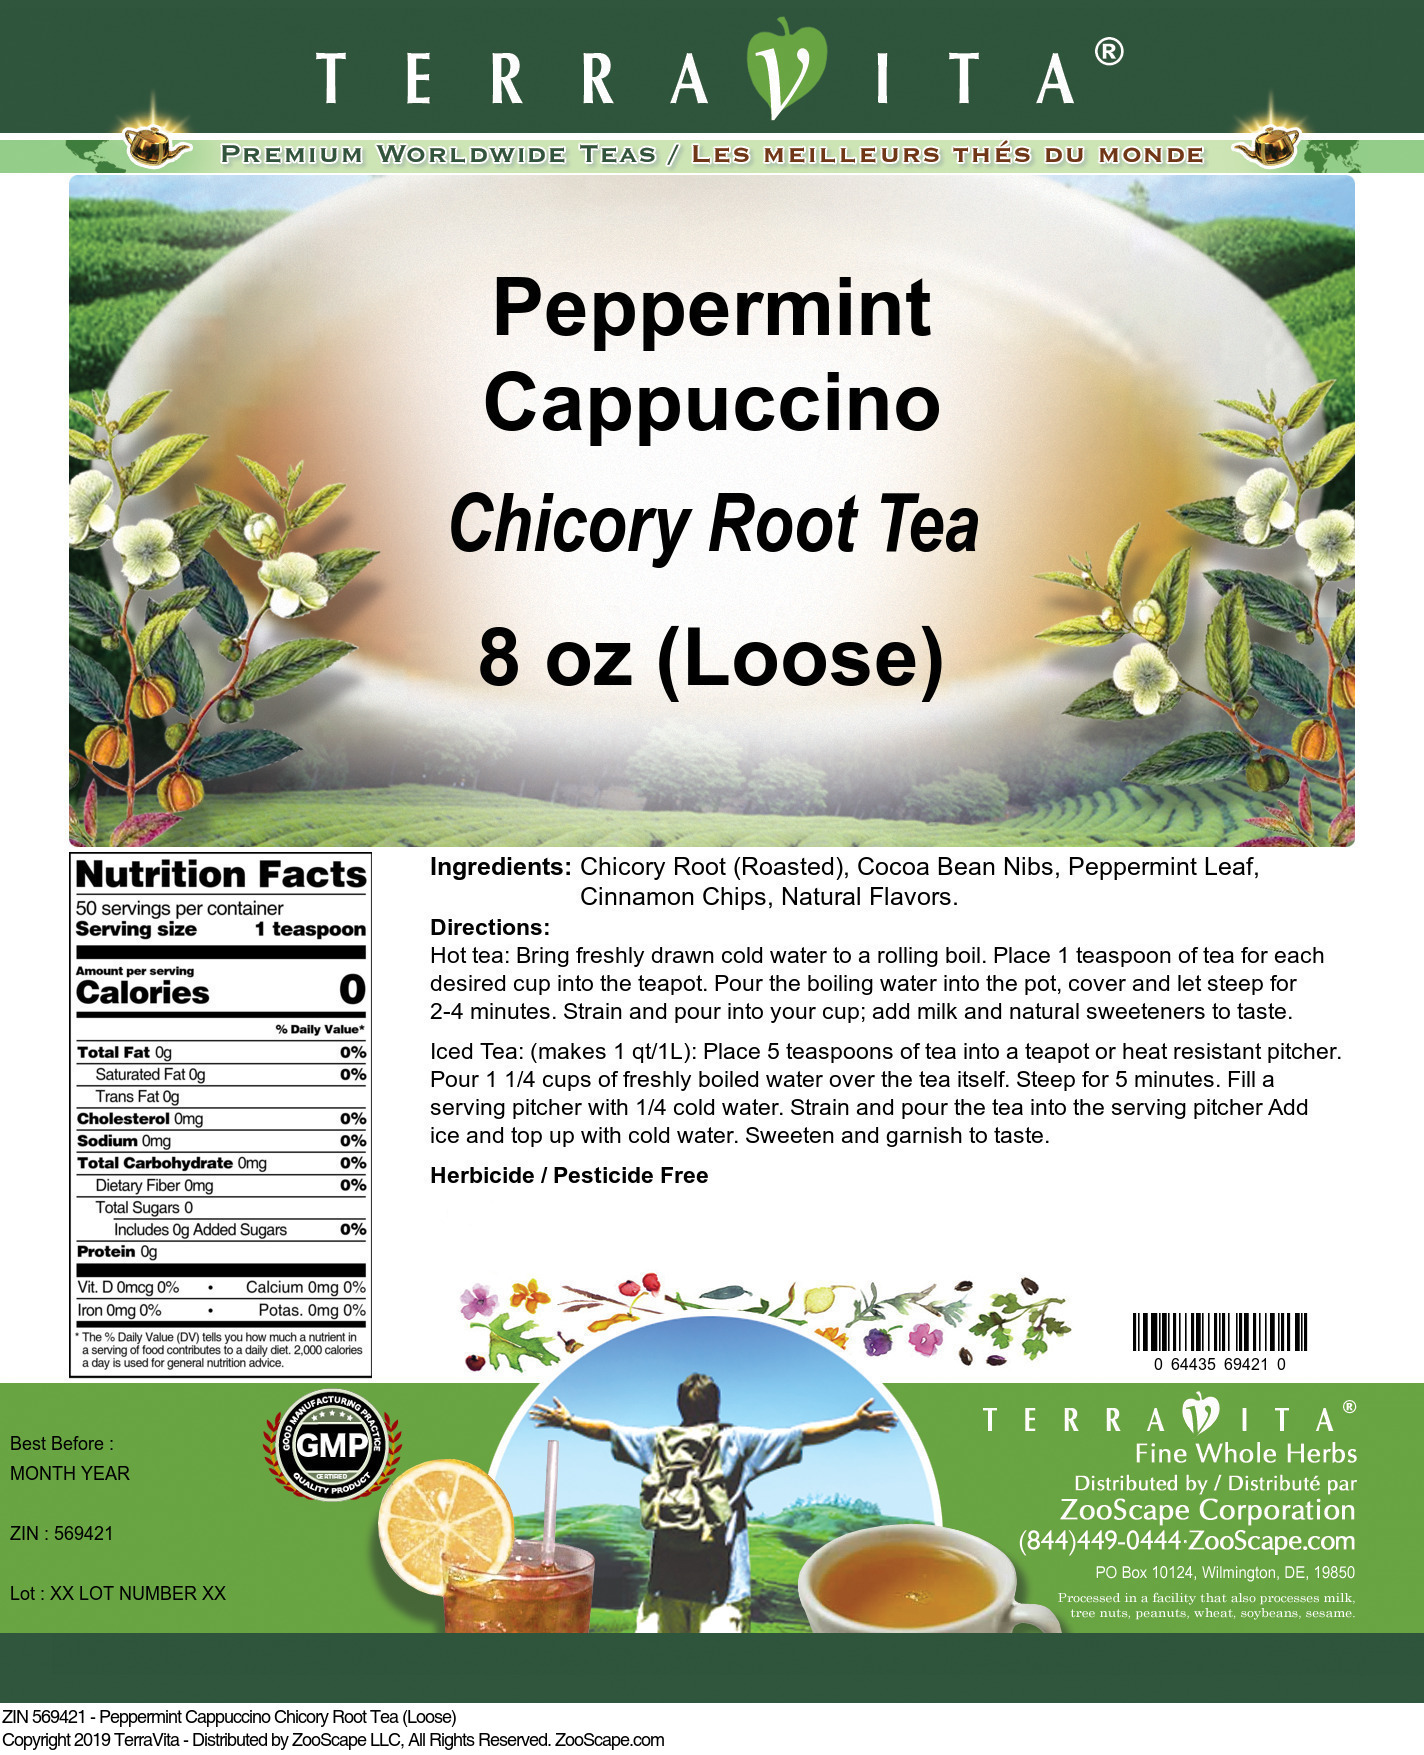 Peppermint Cappuccino Chicory Root Tea (Loose) - Label